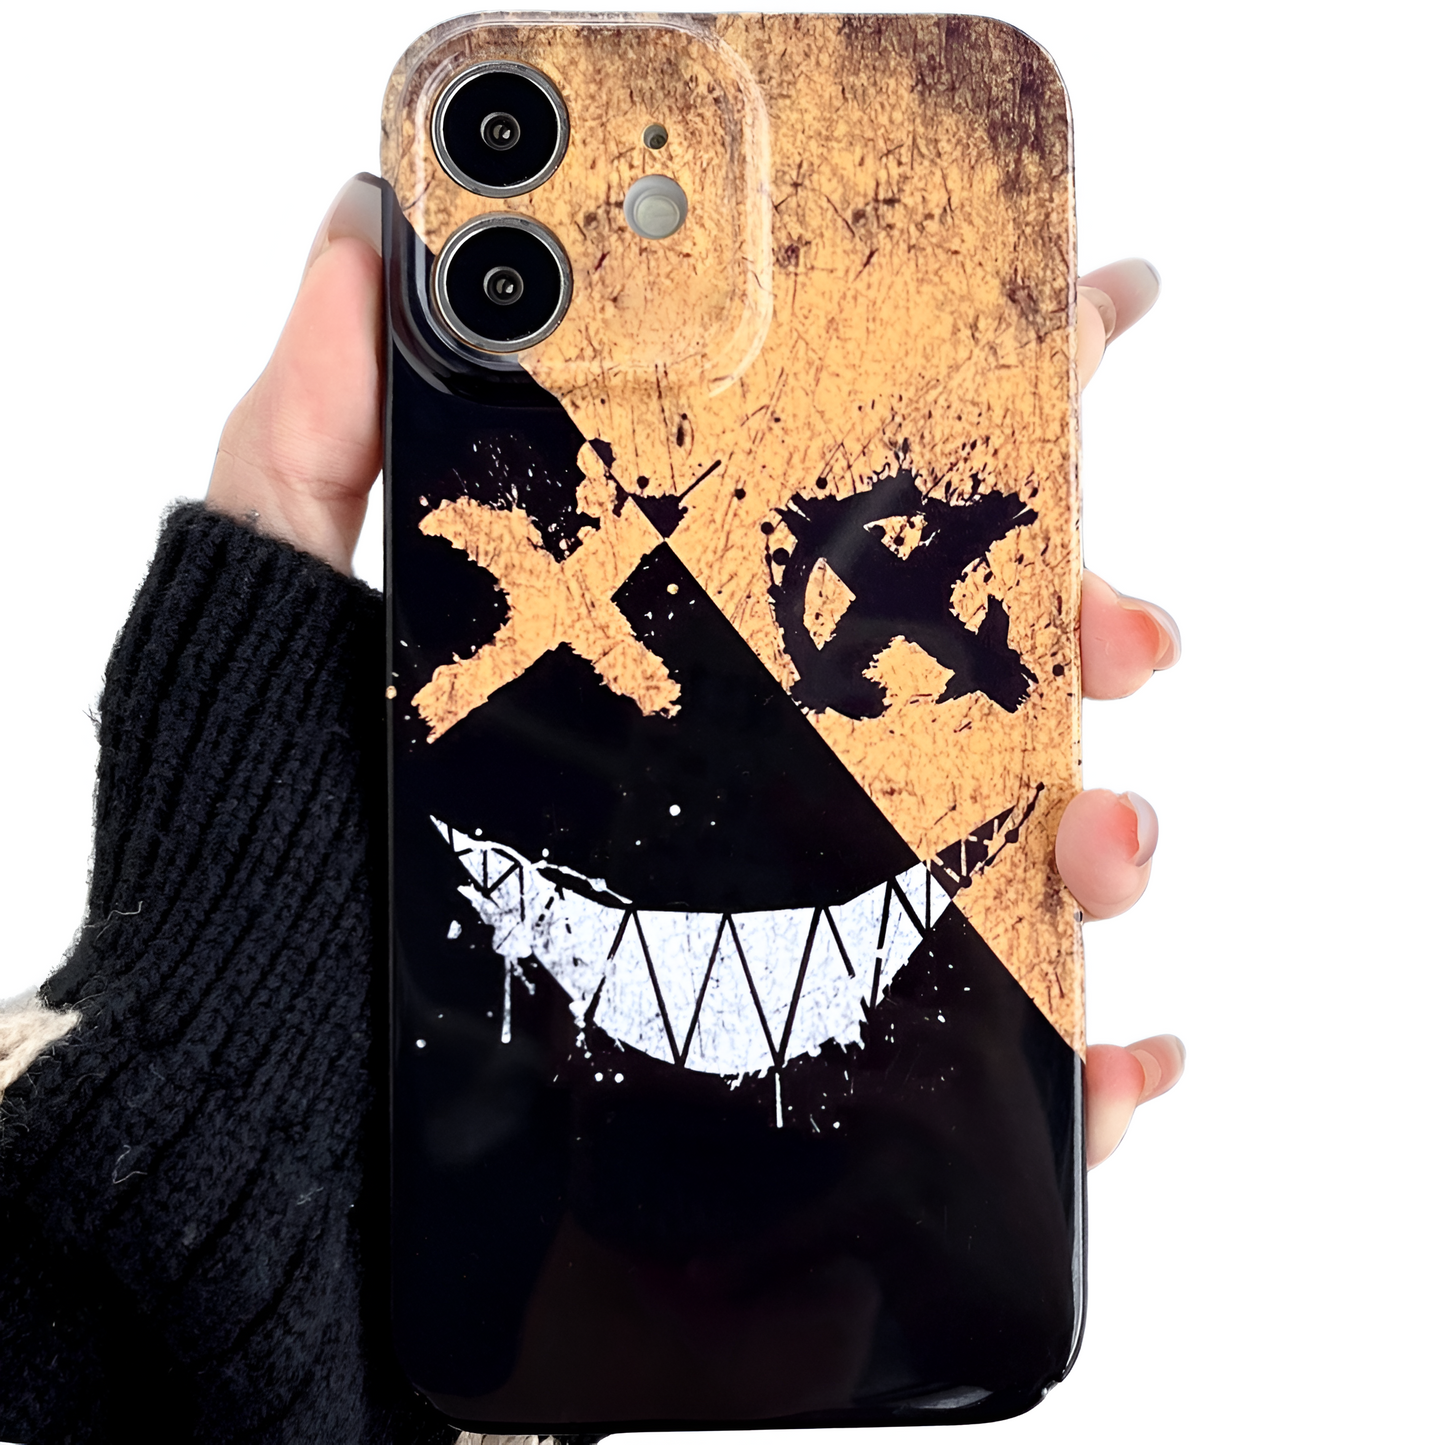 X Smile - Phone Case For iPhone 12